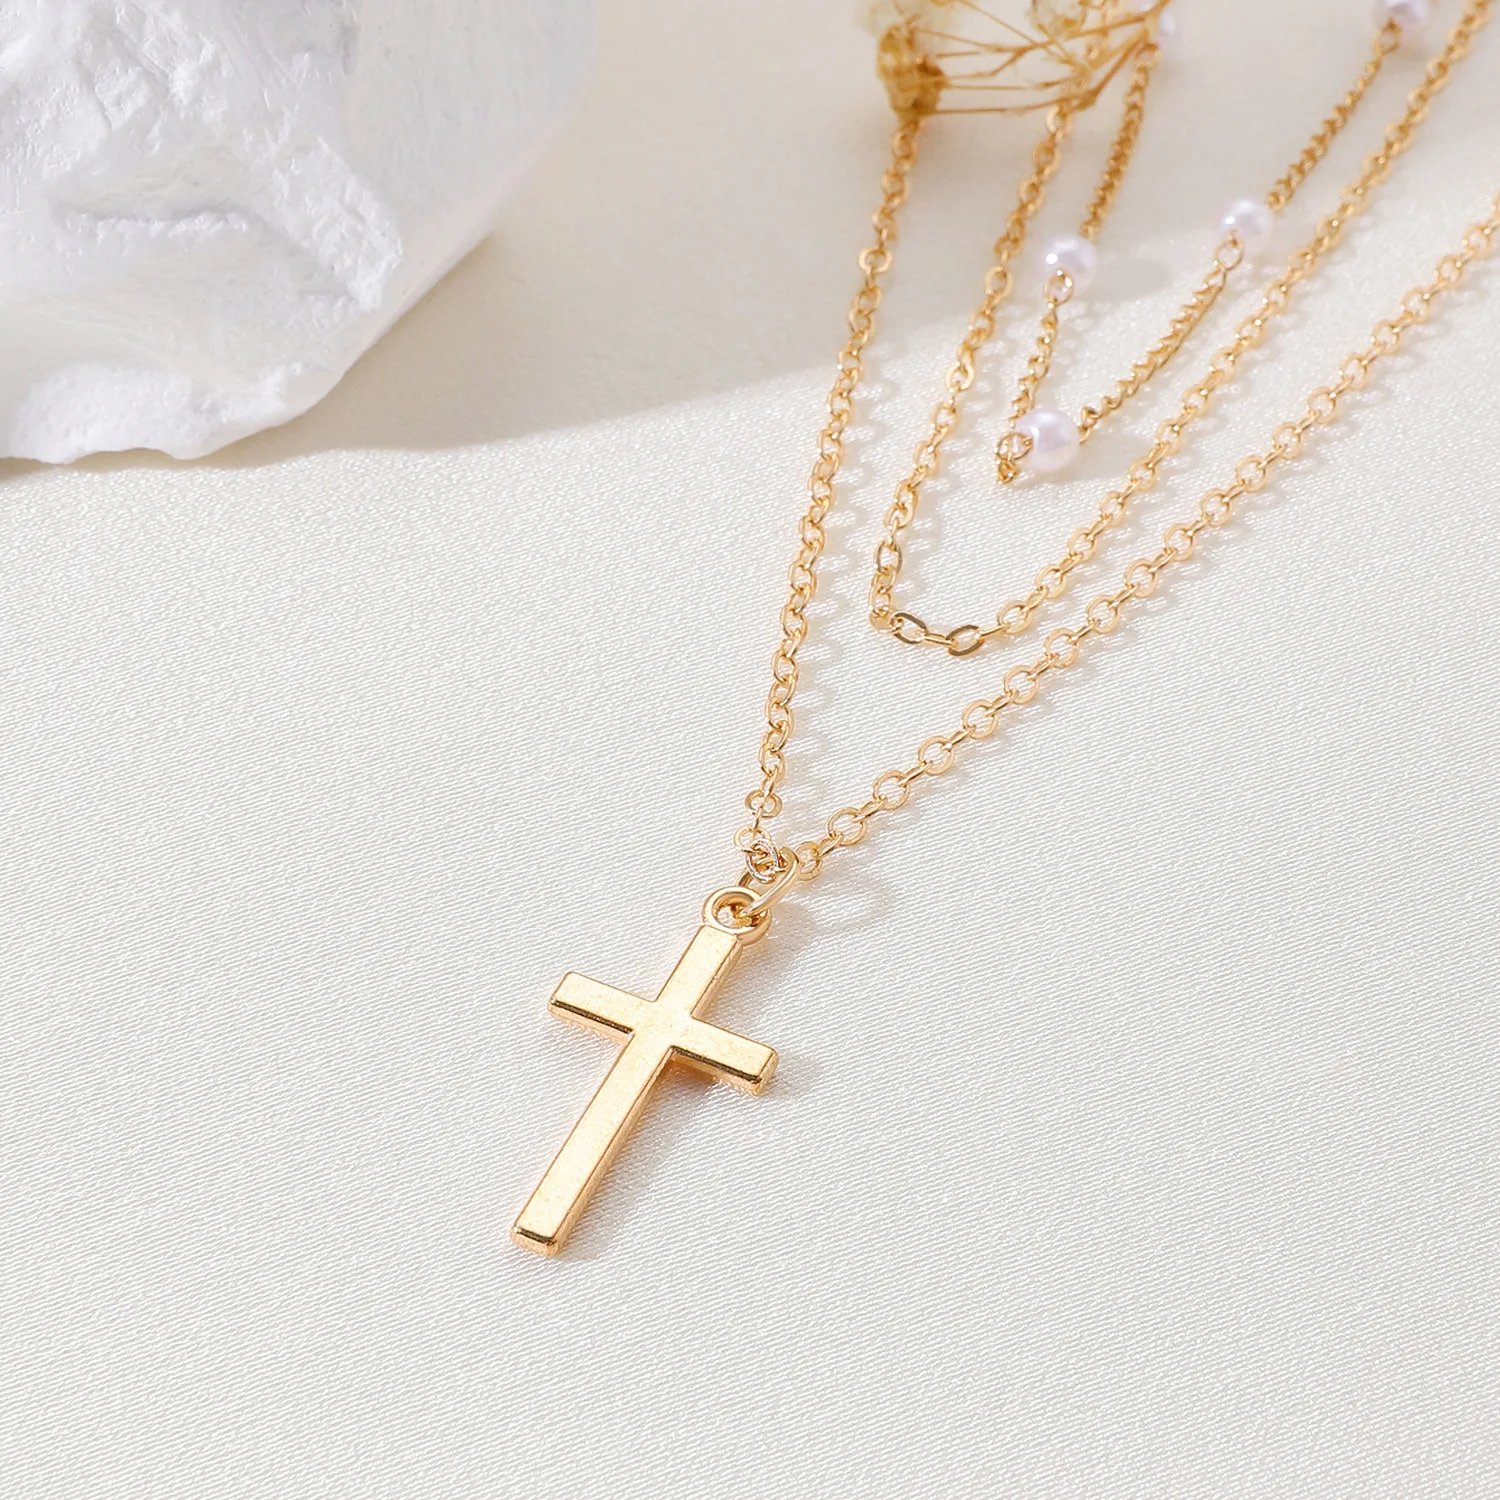 New Laminated Cross Necklace For Women Ins Style Pearl Alloy Multi ...